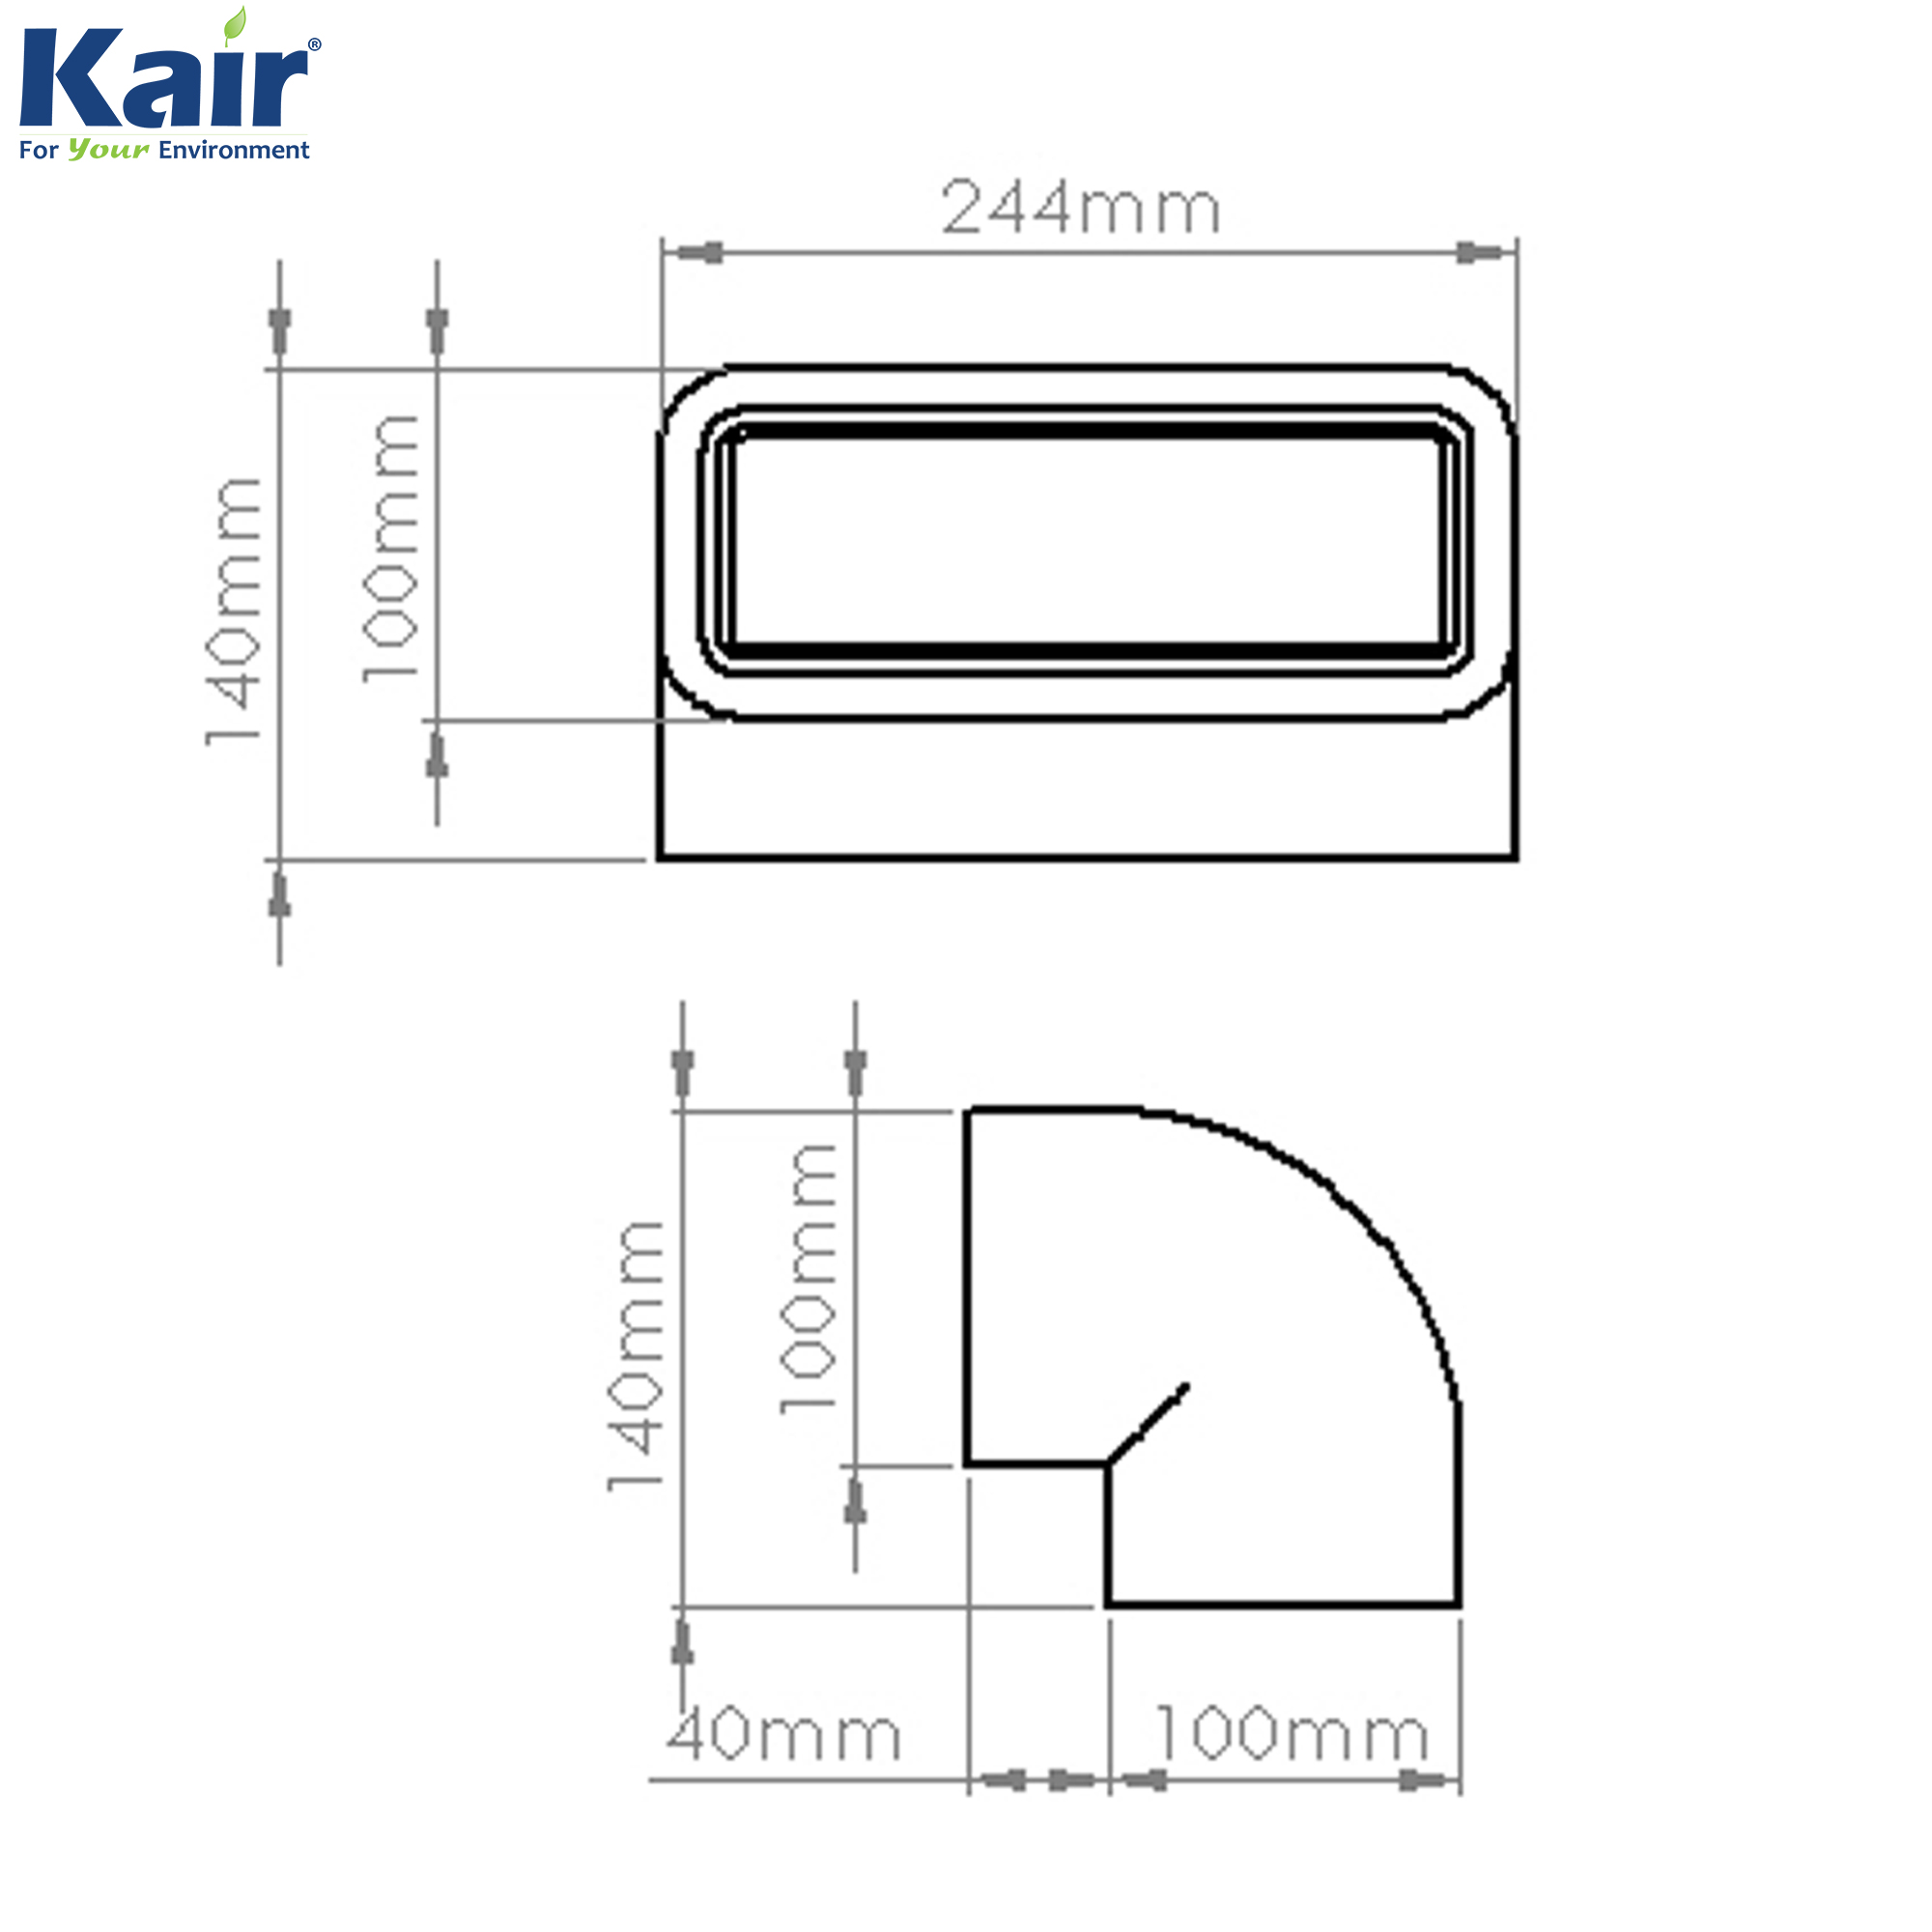 Kair Self-Seal Thermal Ducting 204X60mm Vertical 90 Degree Bend Complete With Female Click And Lock Fittings